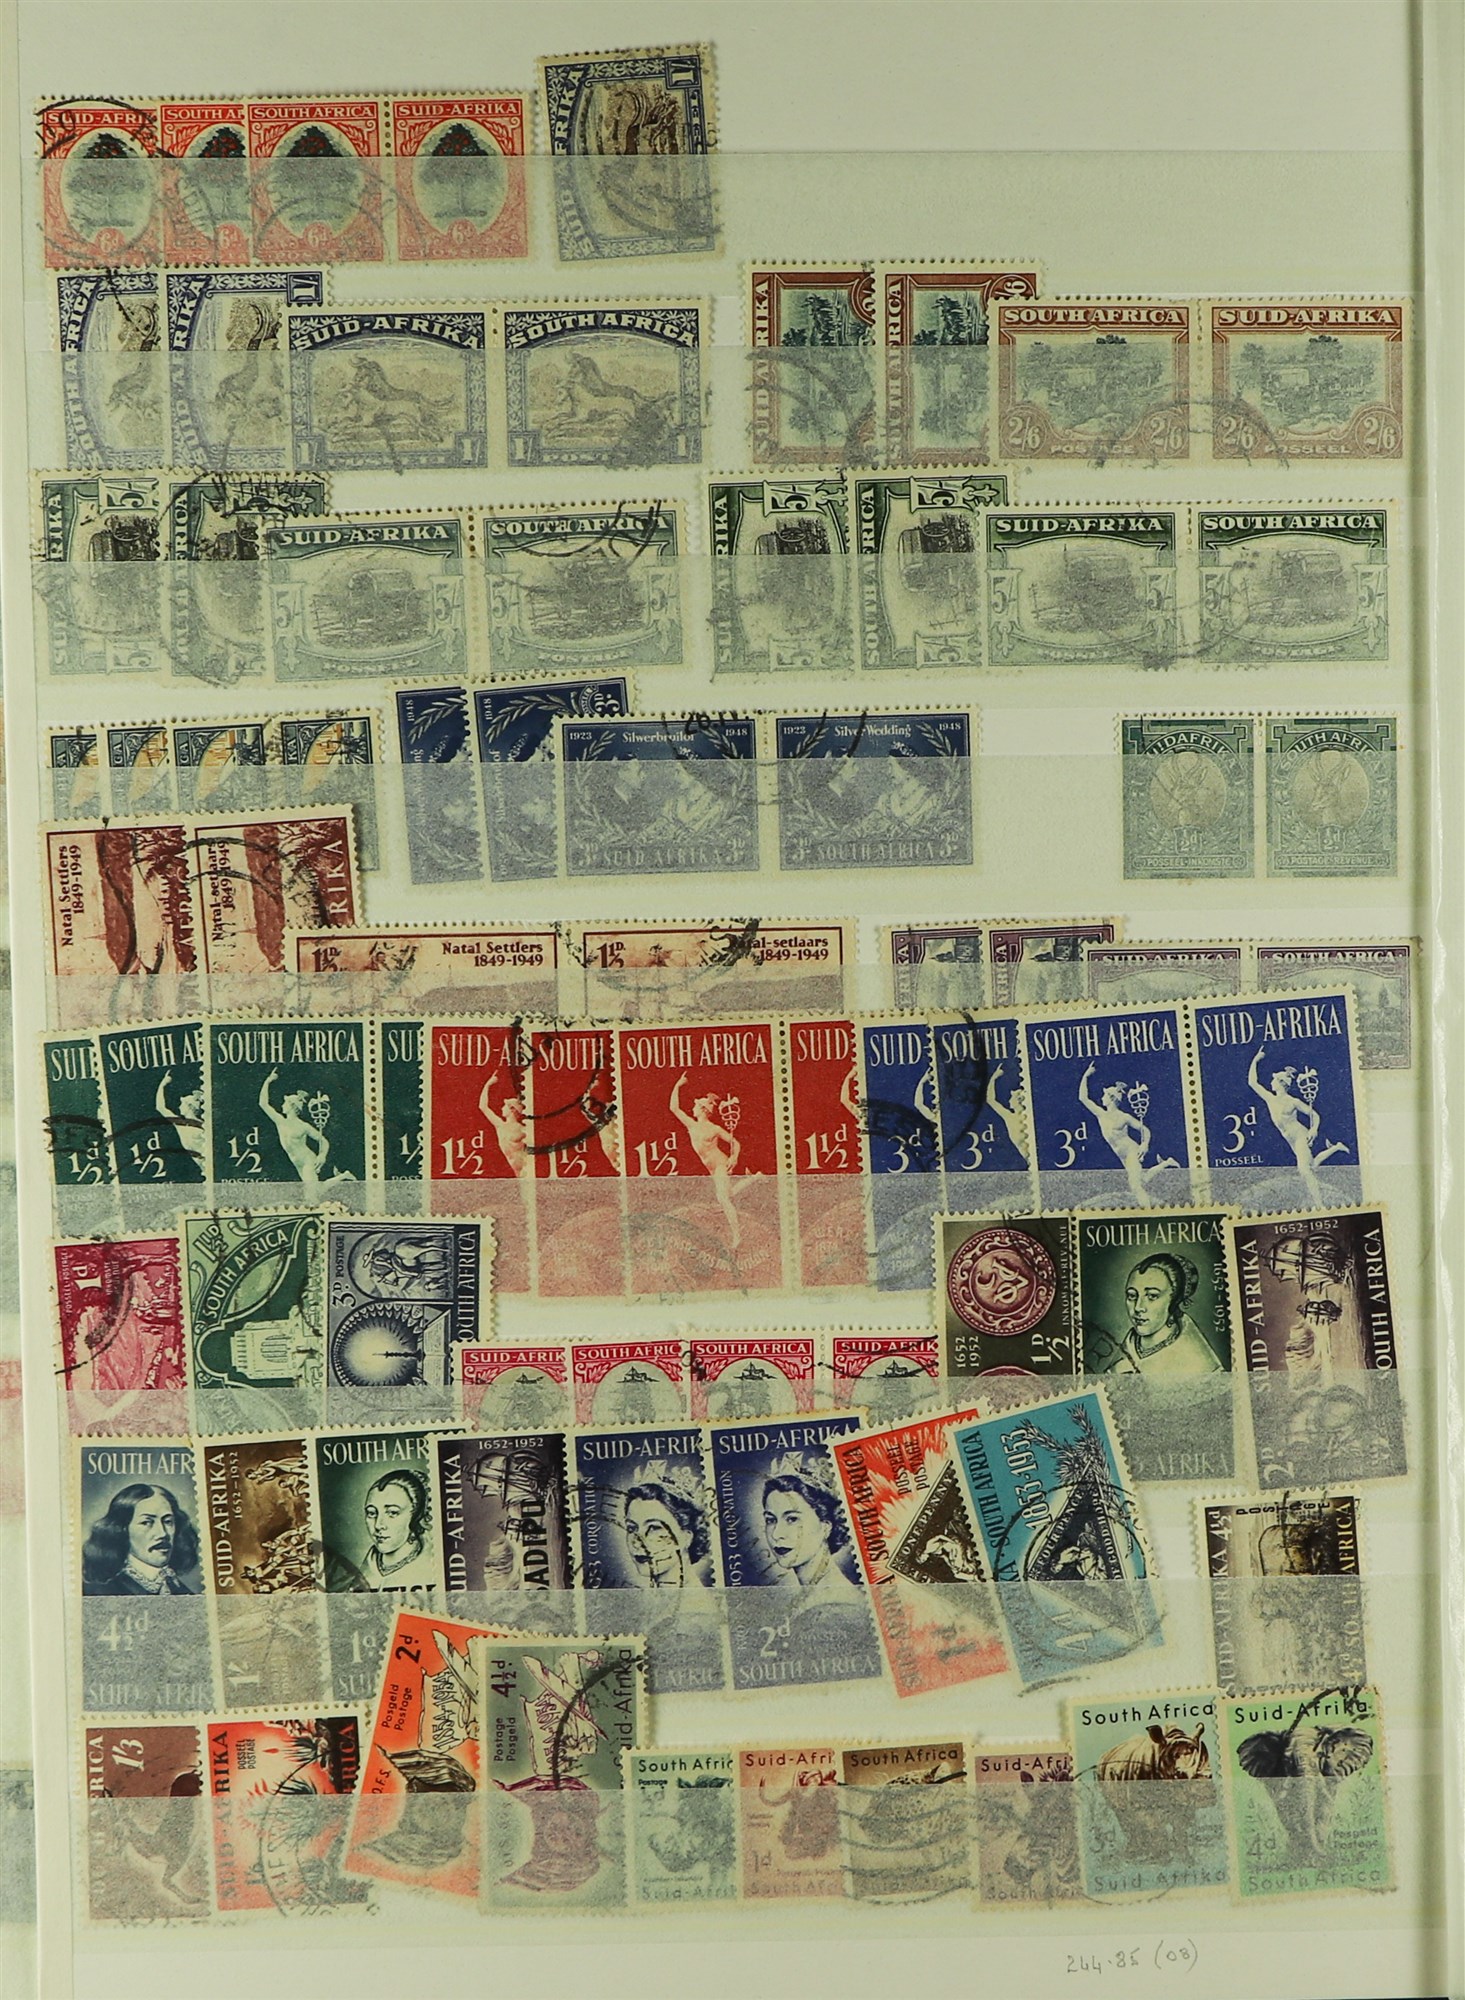 SOUTH AFRICA 1913 - 2000 COLLECTION / ACCUMULATION of 1500+ mint / never hinged mint & used stamps - Image 8 of 15